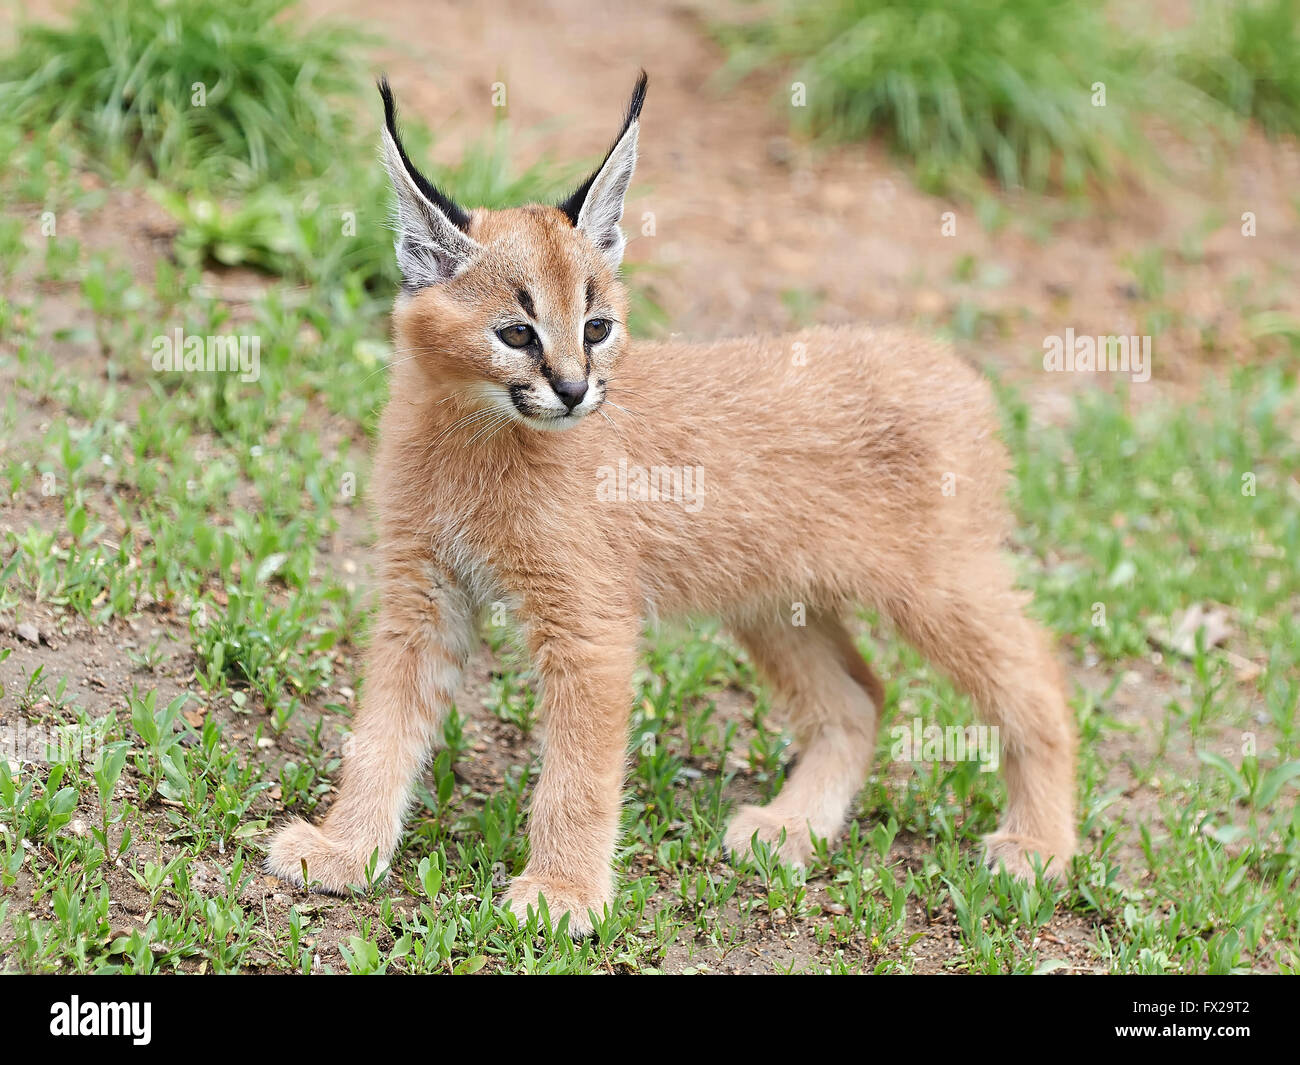 Cute and furry baby Caracal in its habitat Stock Photo